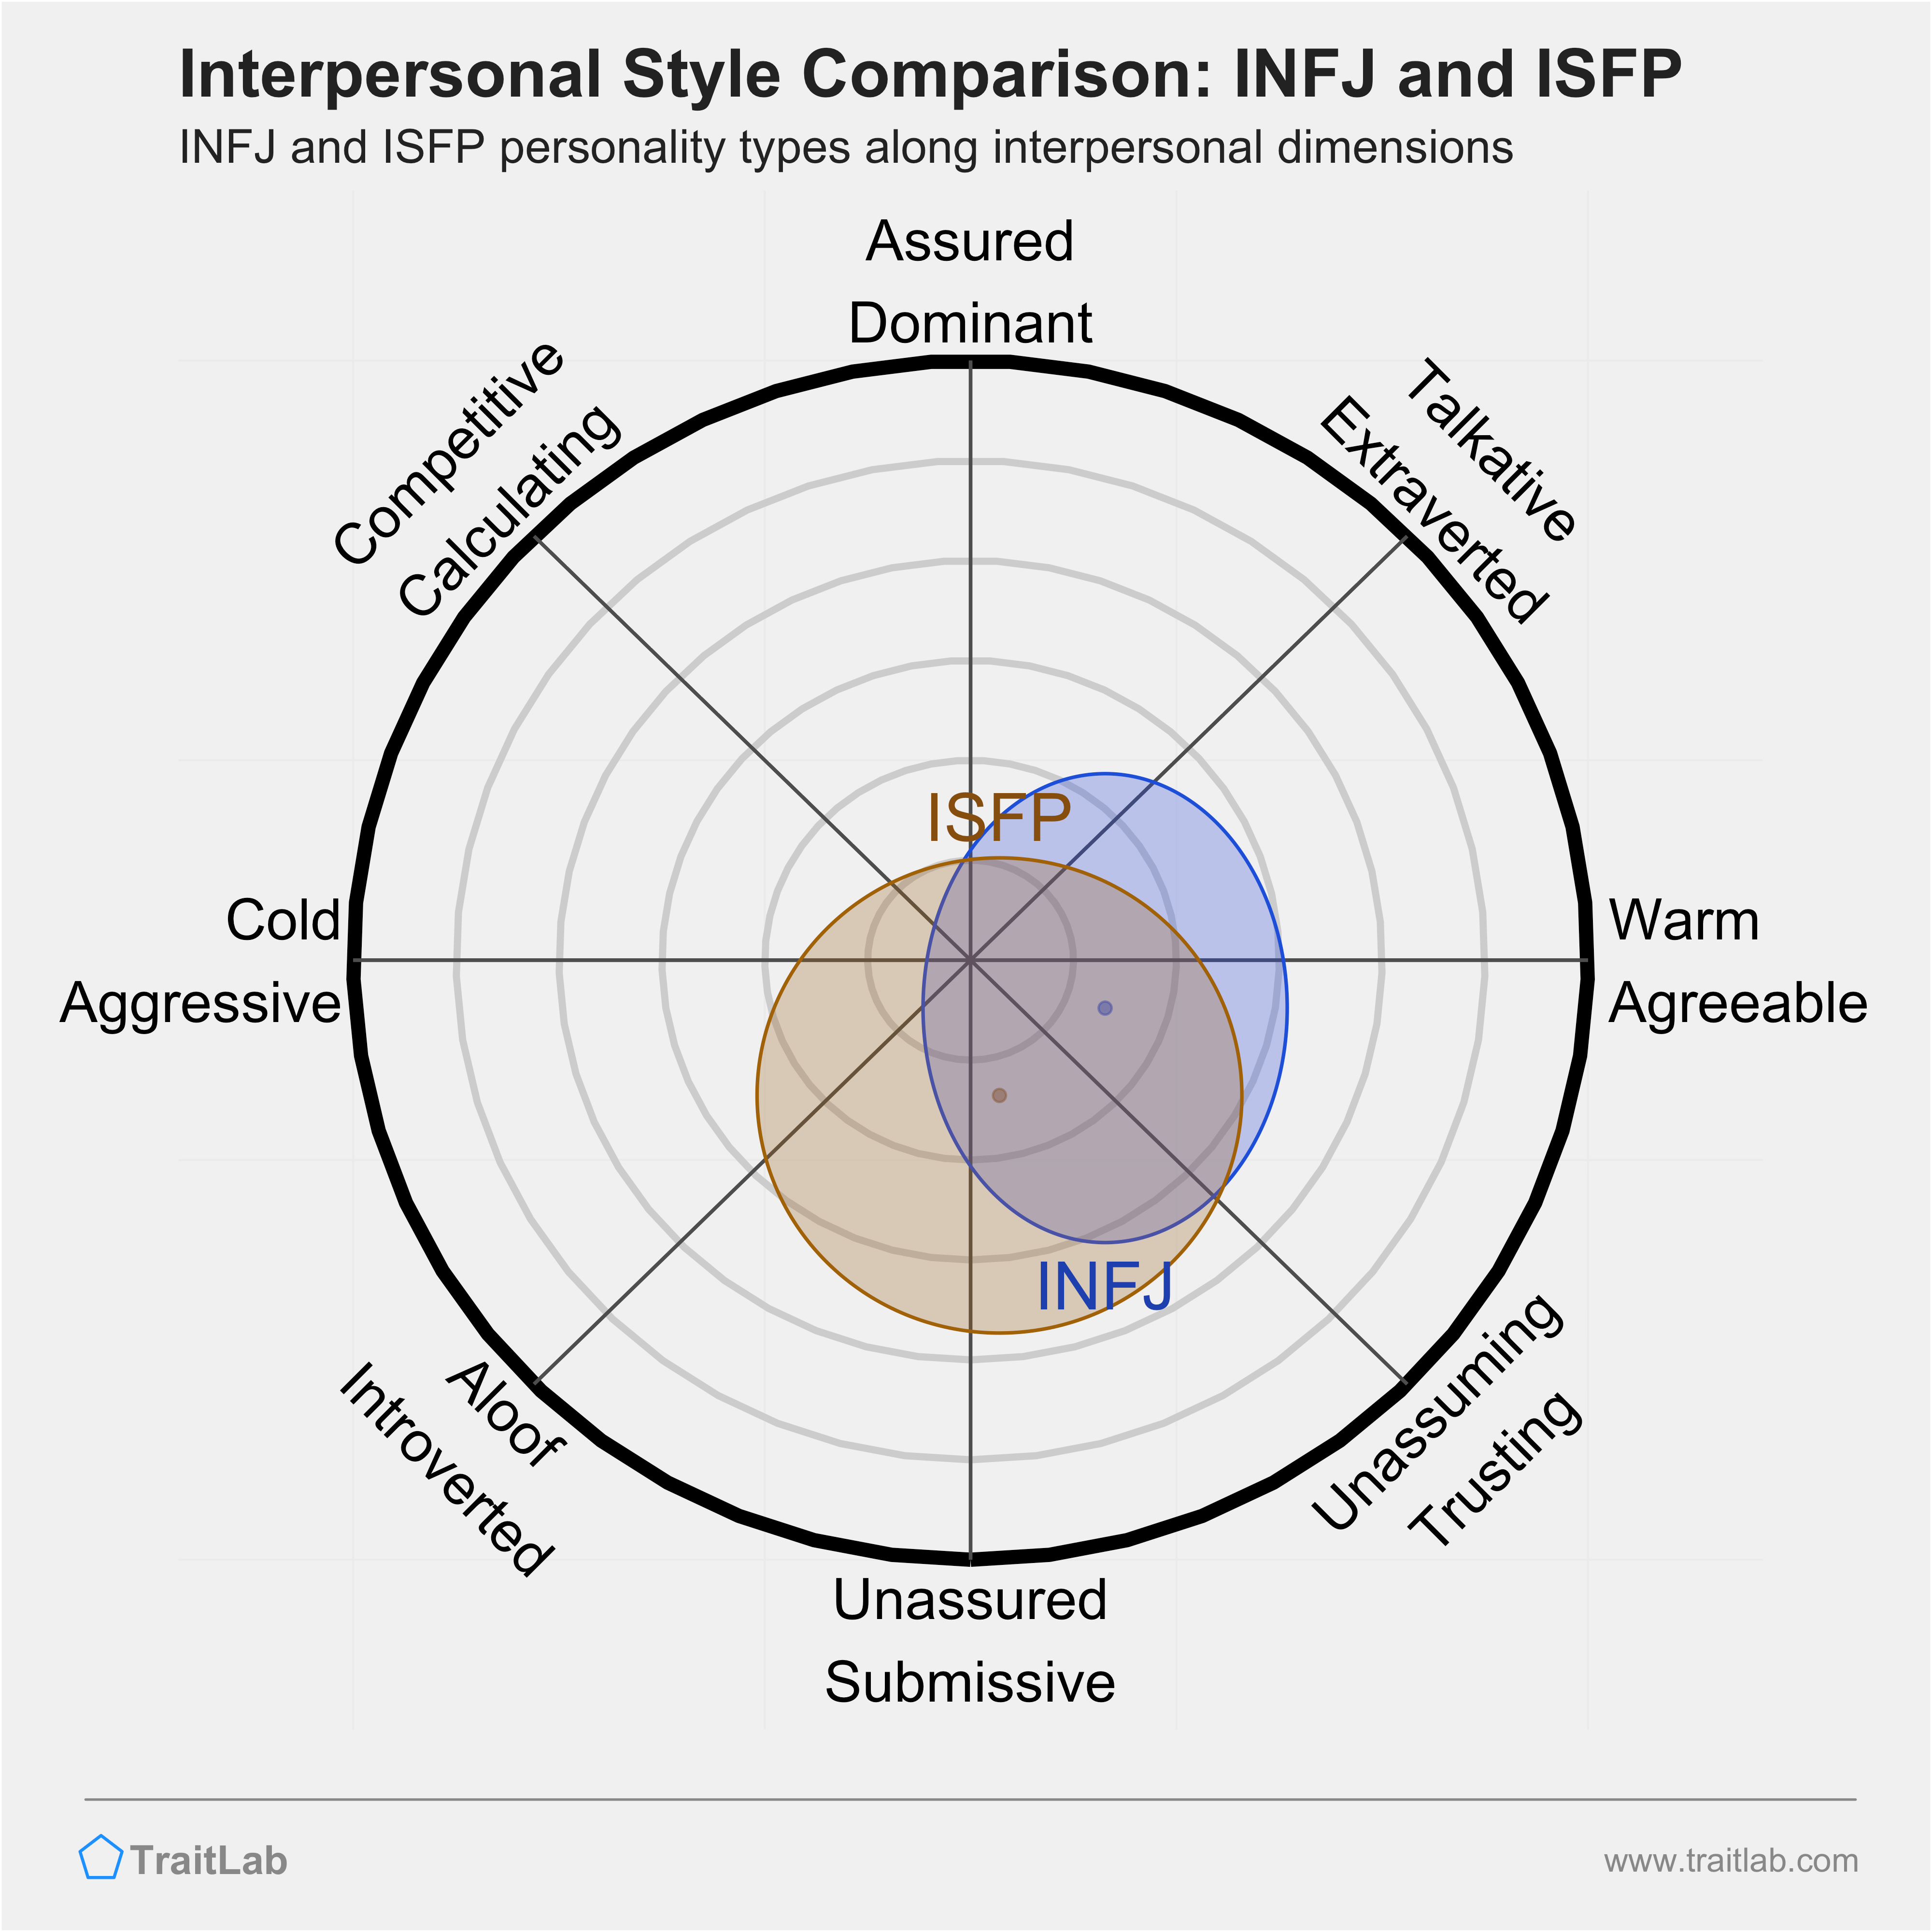 INFJ and ISFP comparison across interpersonal dimensions